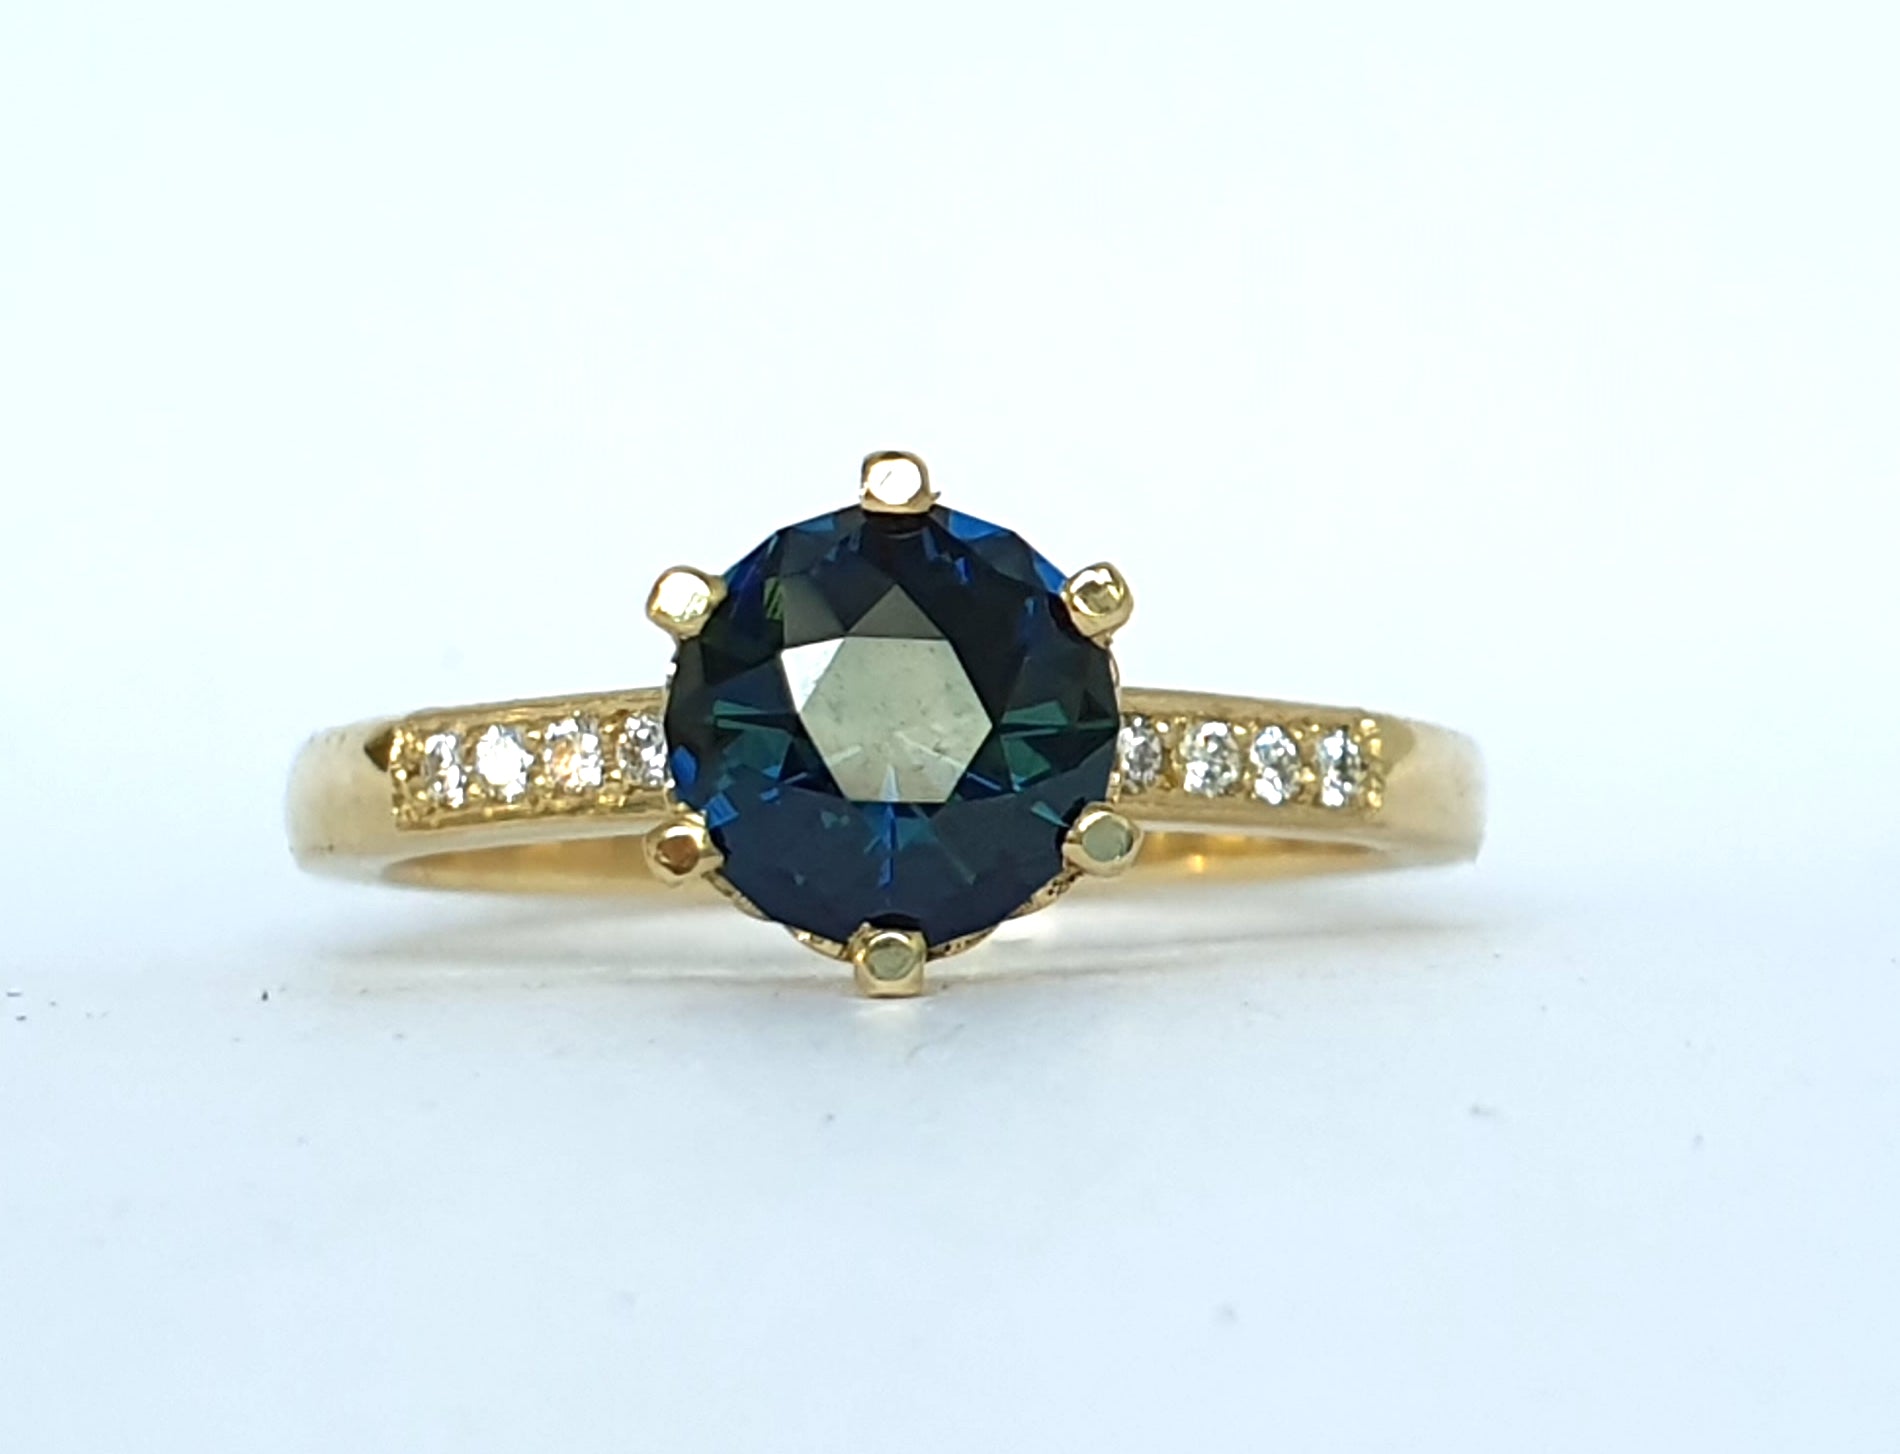 SALE - Poppy Solitaire - Teal Sapphire